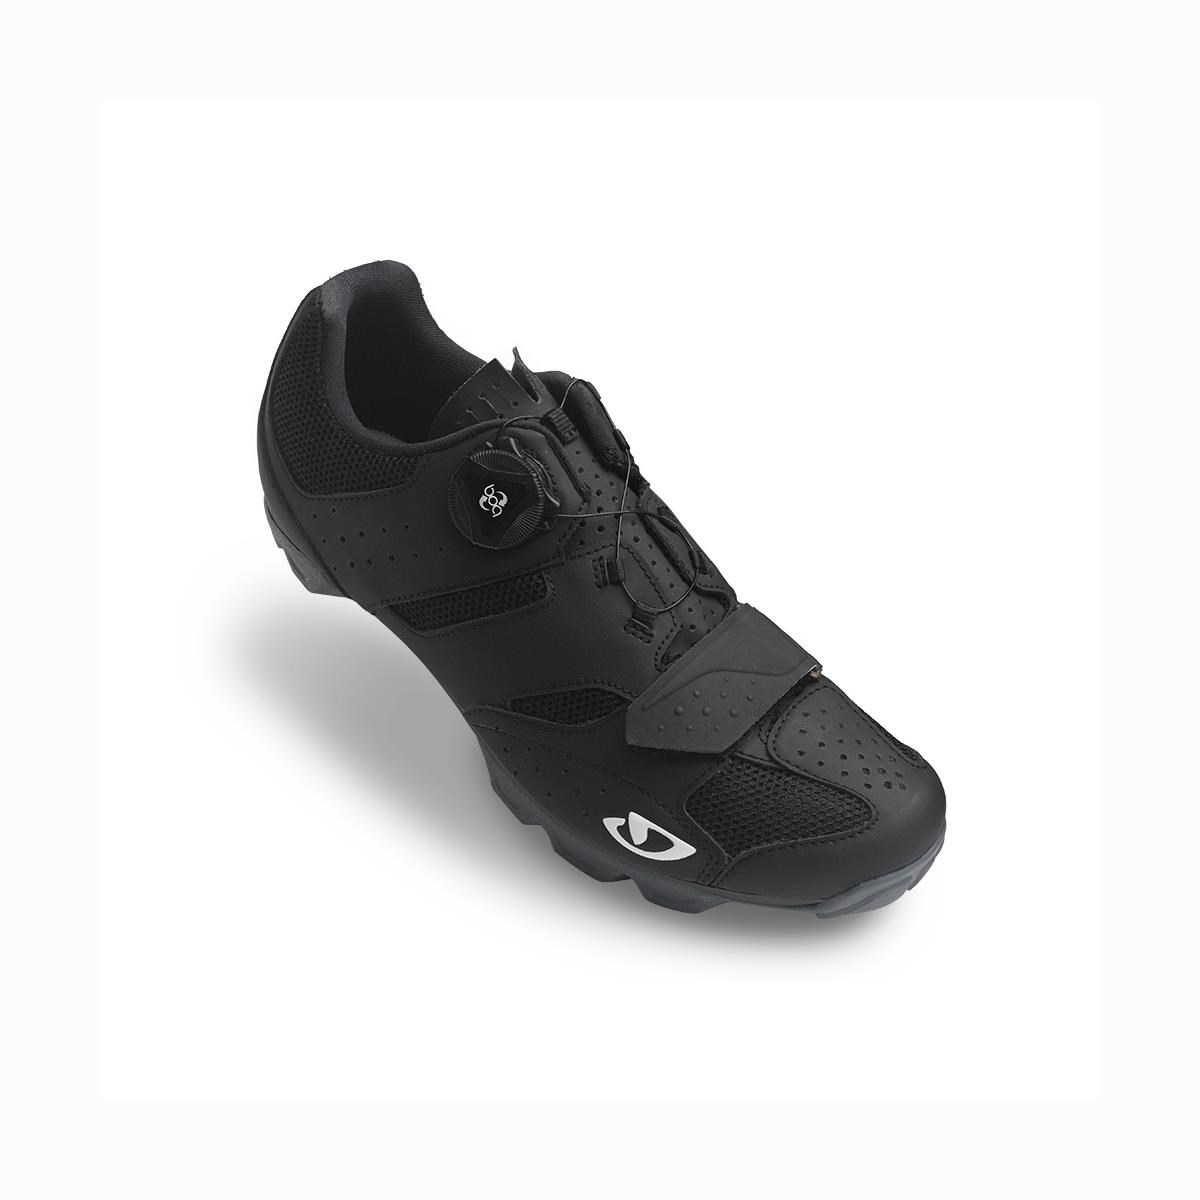 Giro Cylinder SPD Womens MTB Cycling Shoes product image